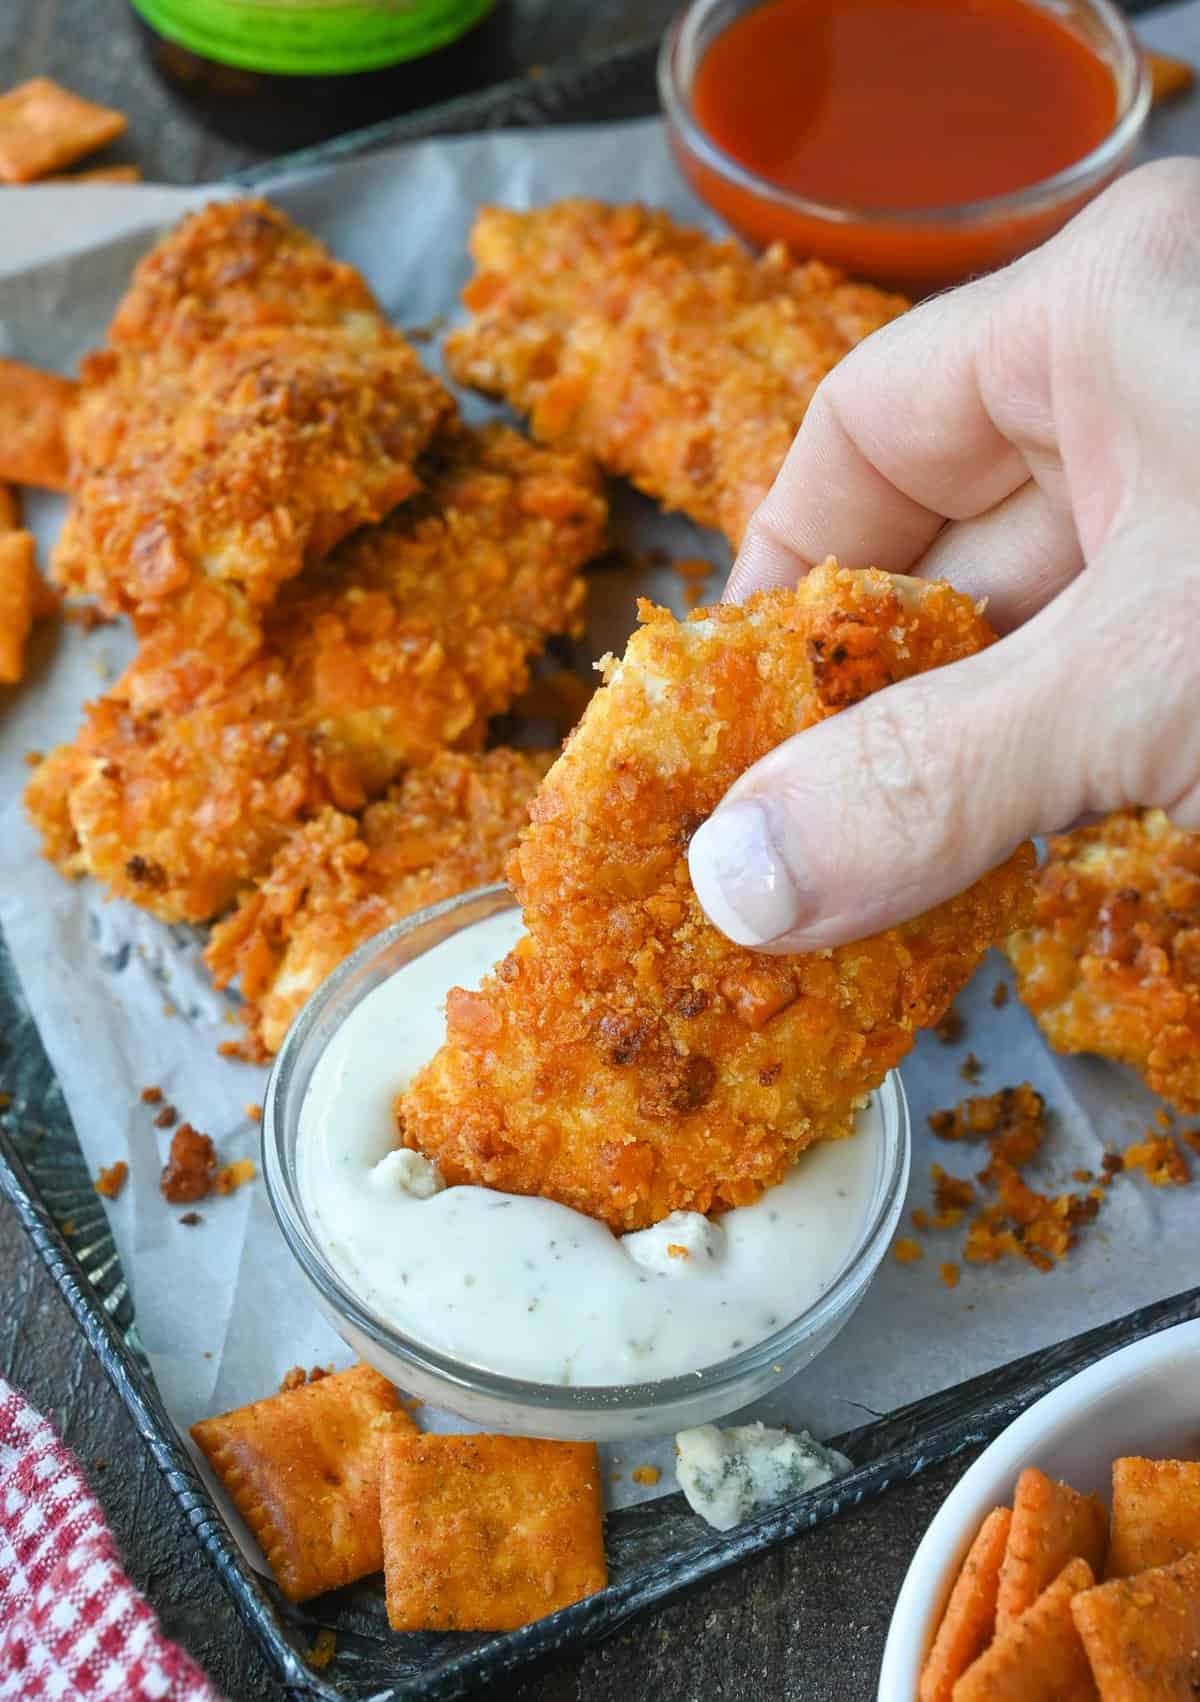 Image of a hand dipping a buffalo chicken tender into a dish of blue cheese dressing.